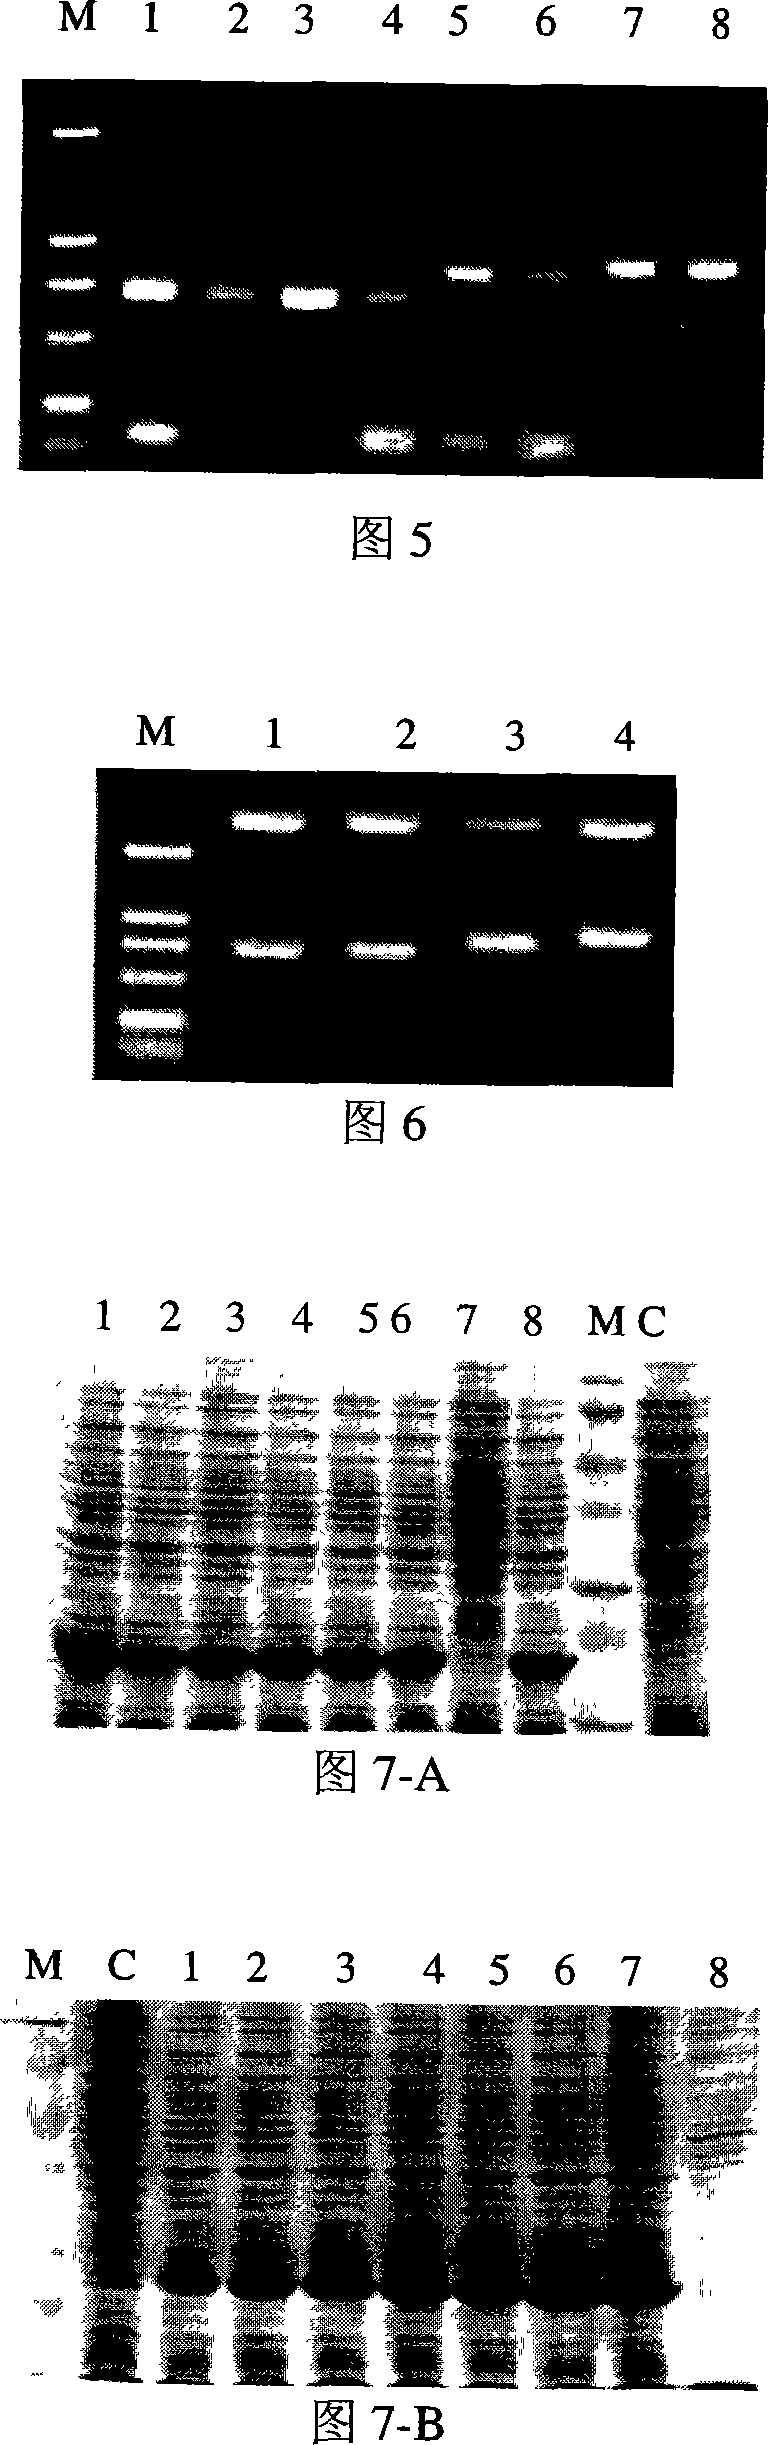 Representation method for recombinant american cockroaches allergen protein